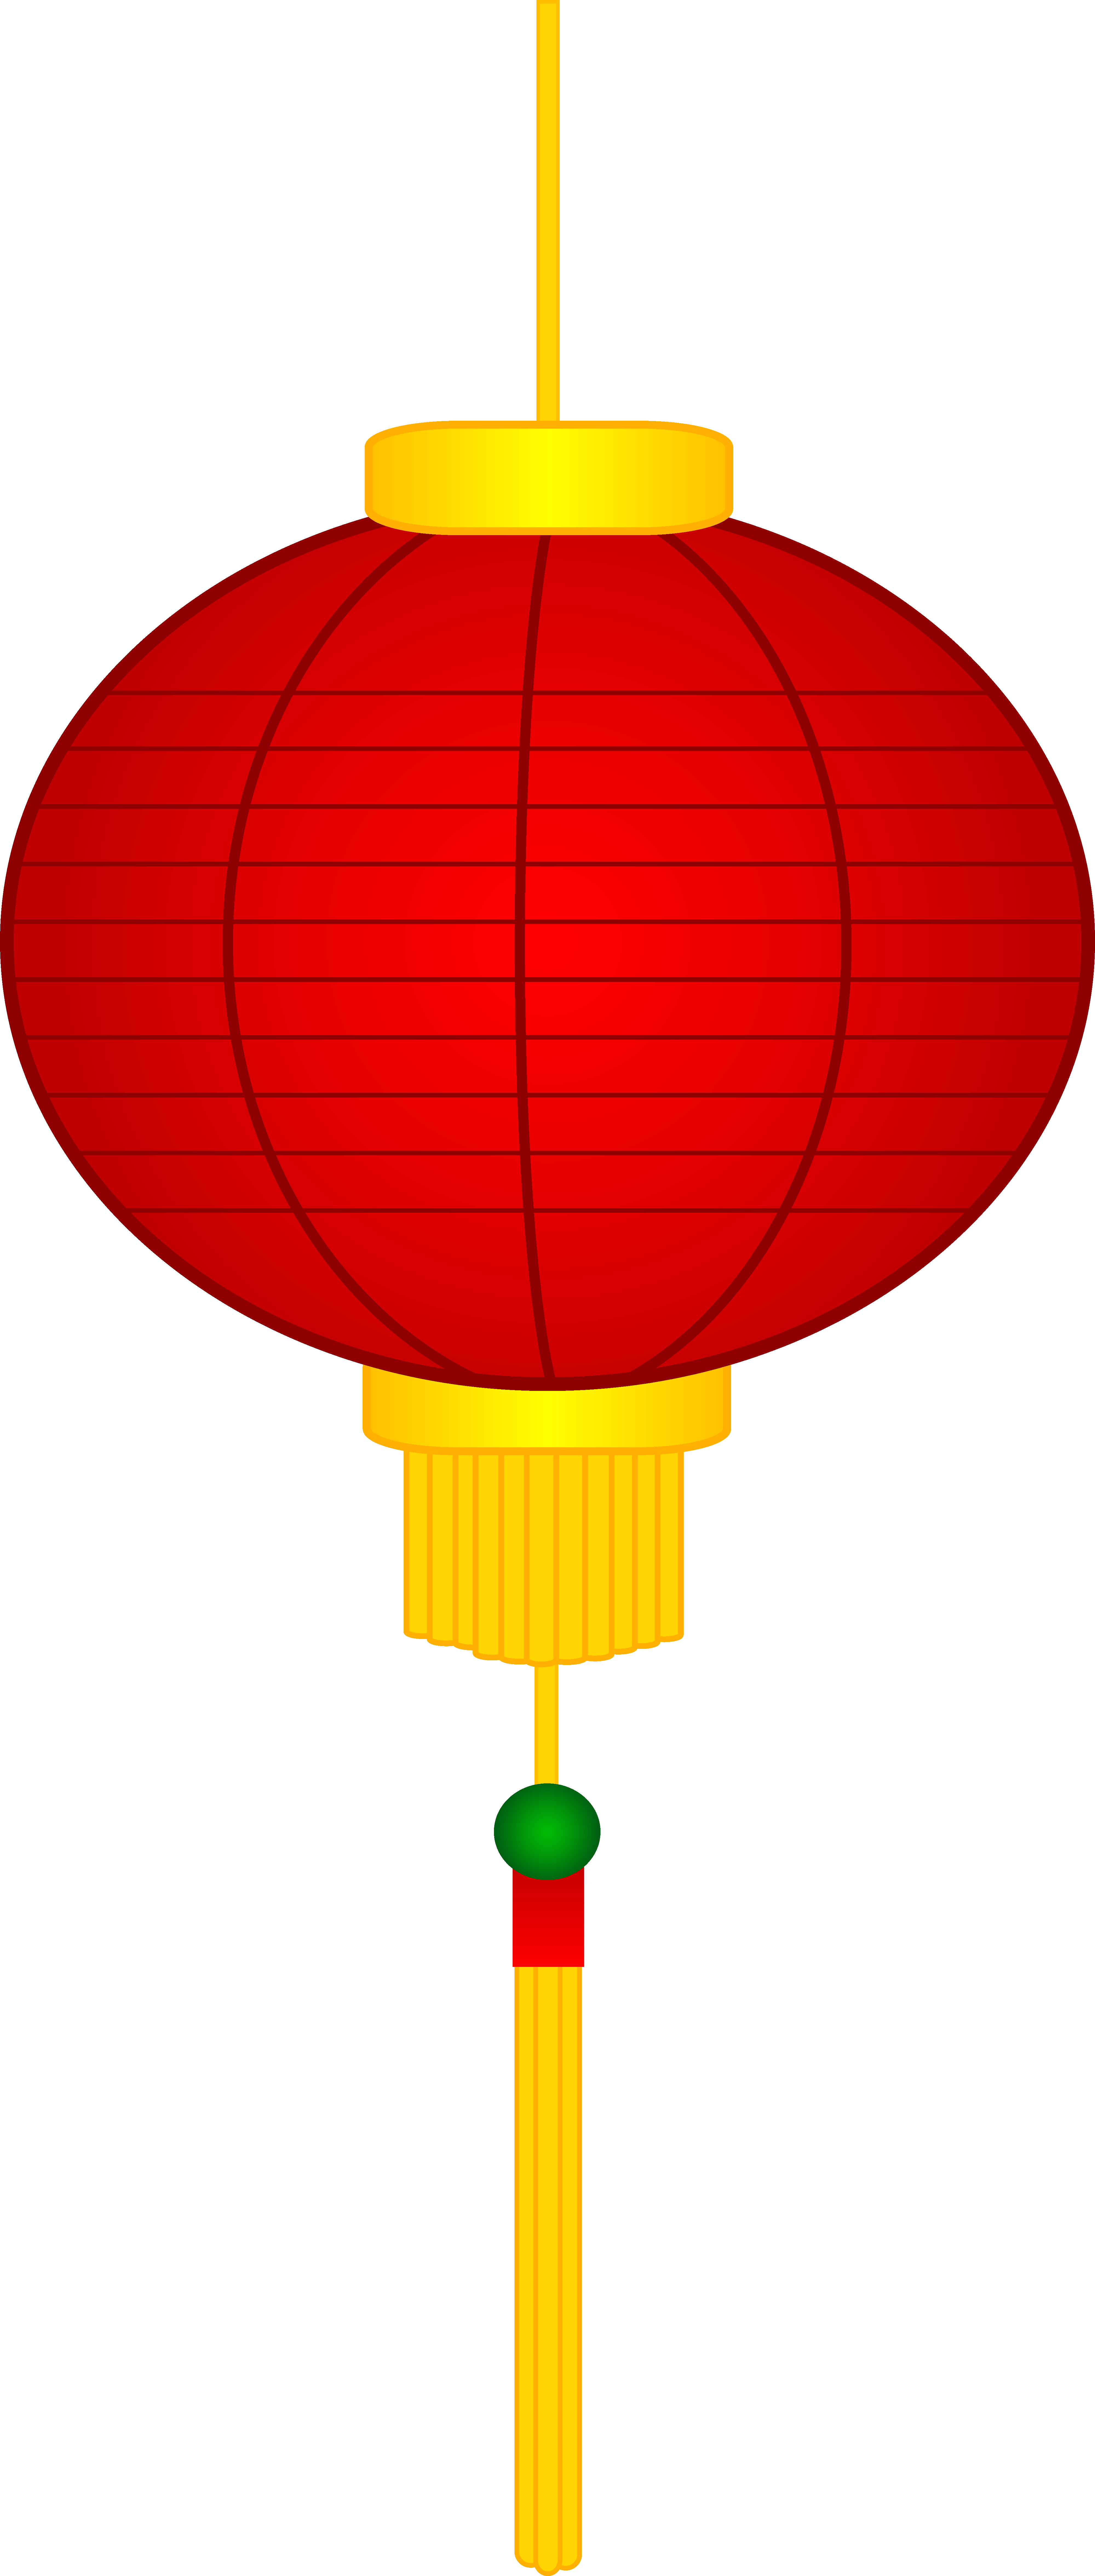 Chinese Lantern Clip Art - Cliparts.co